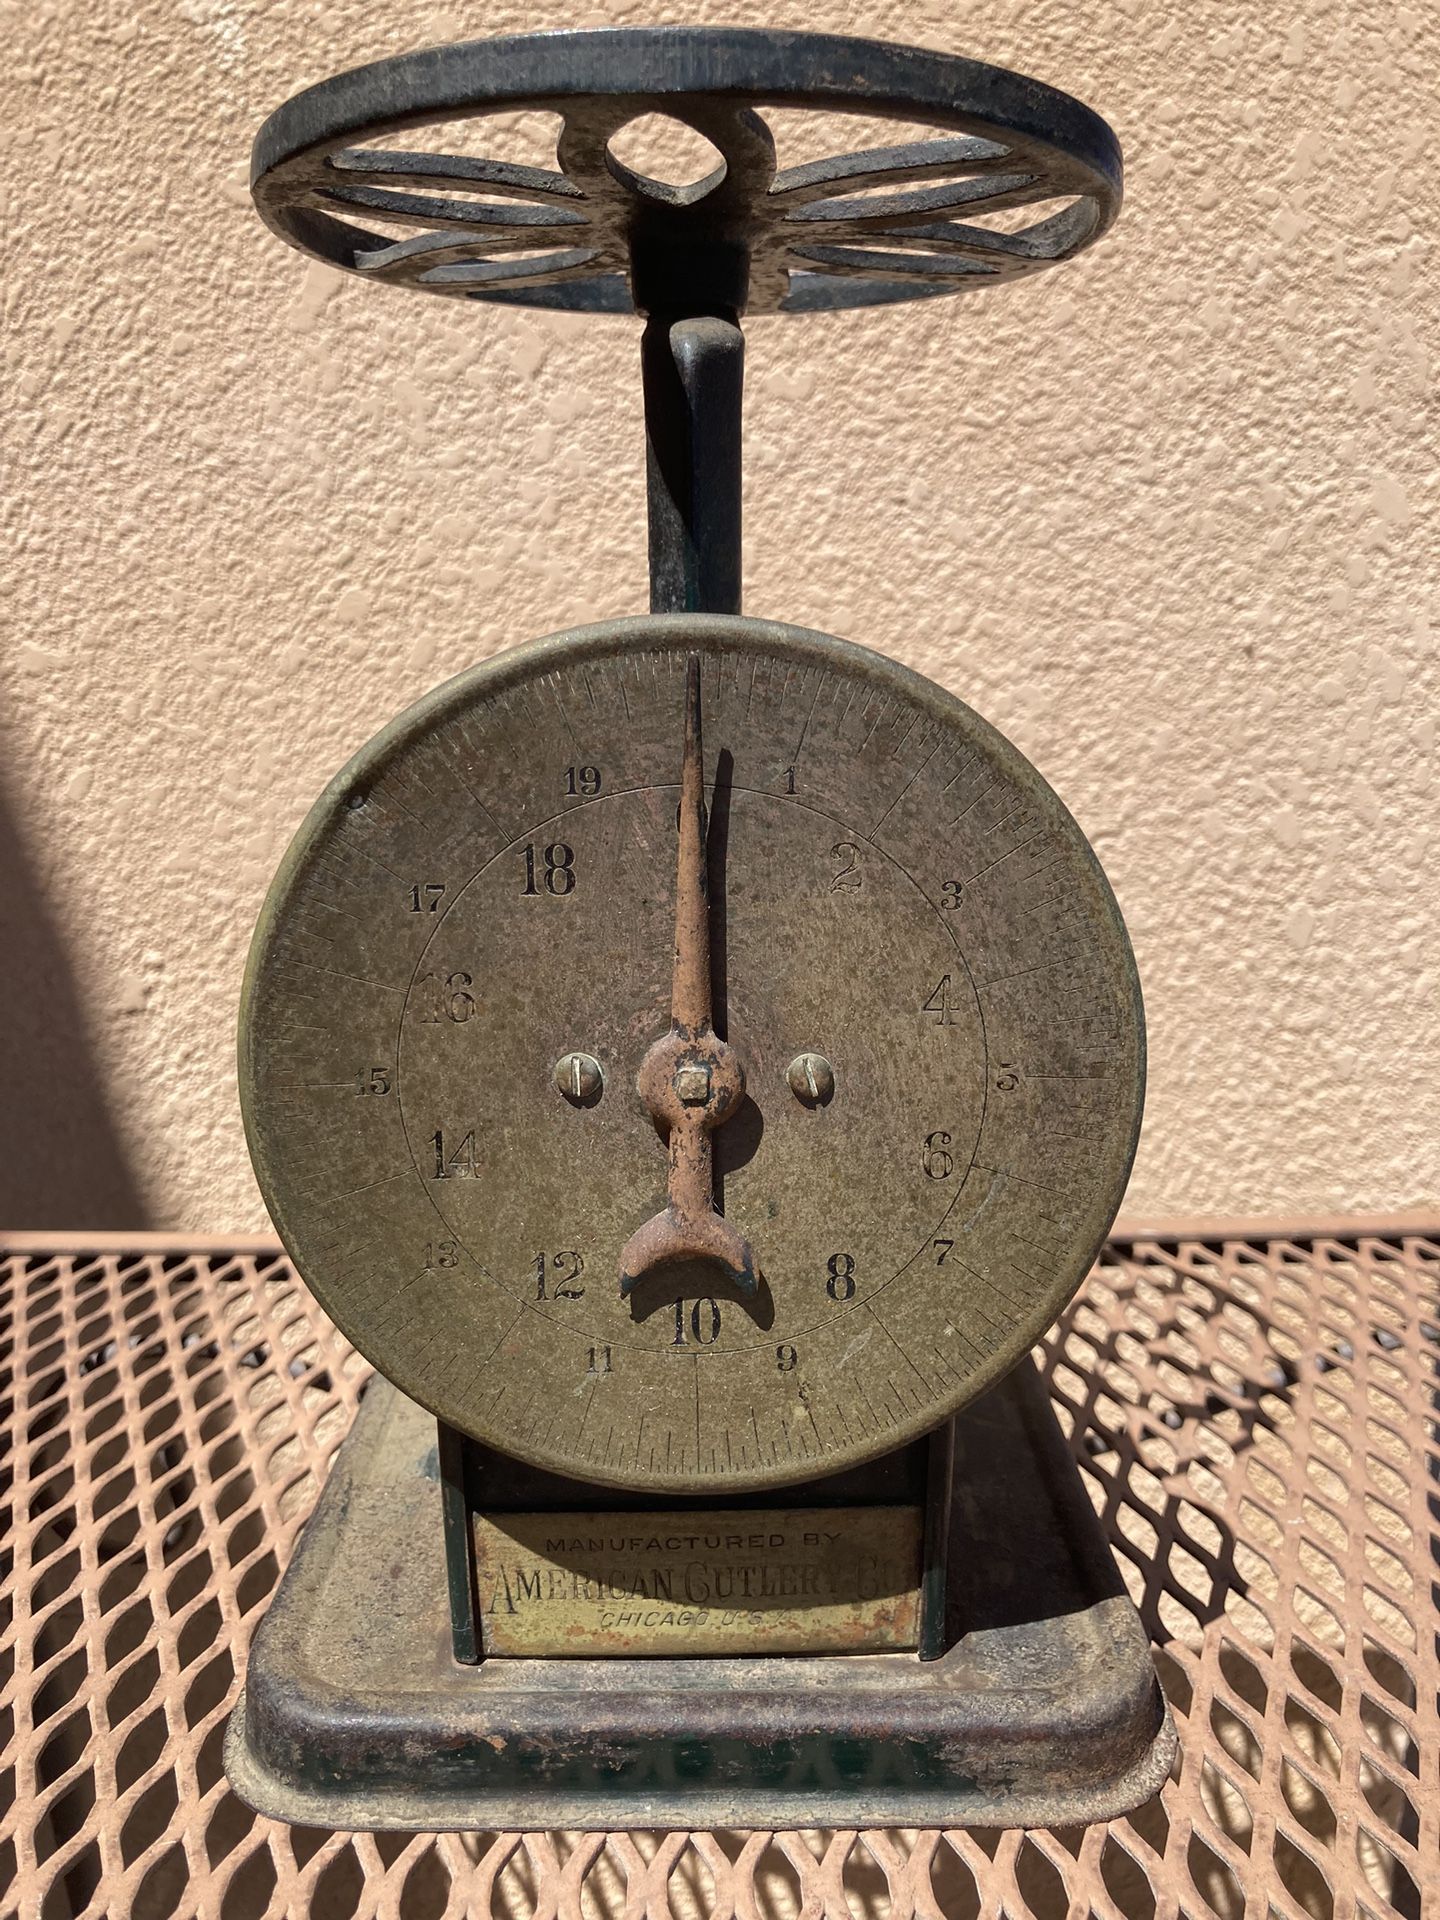 Vintage American Cutlery Co Kitchen Scale